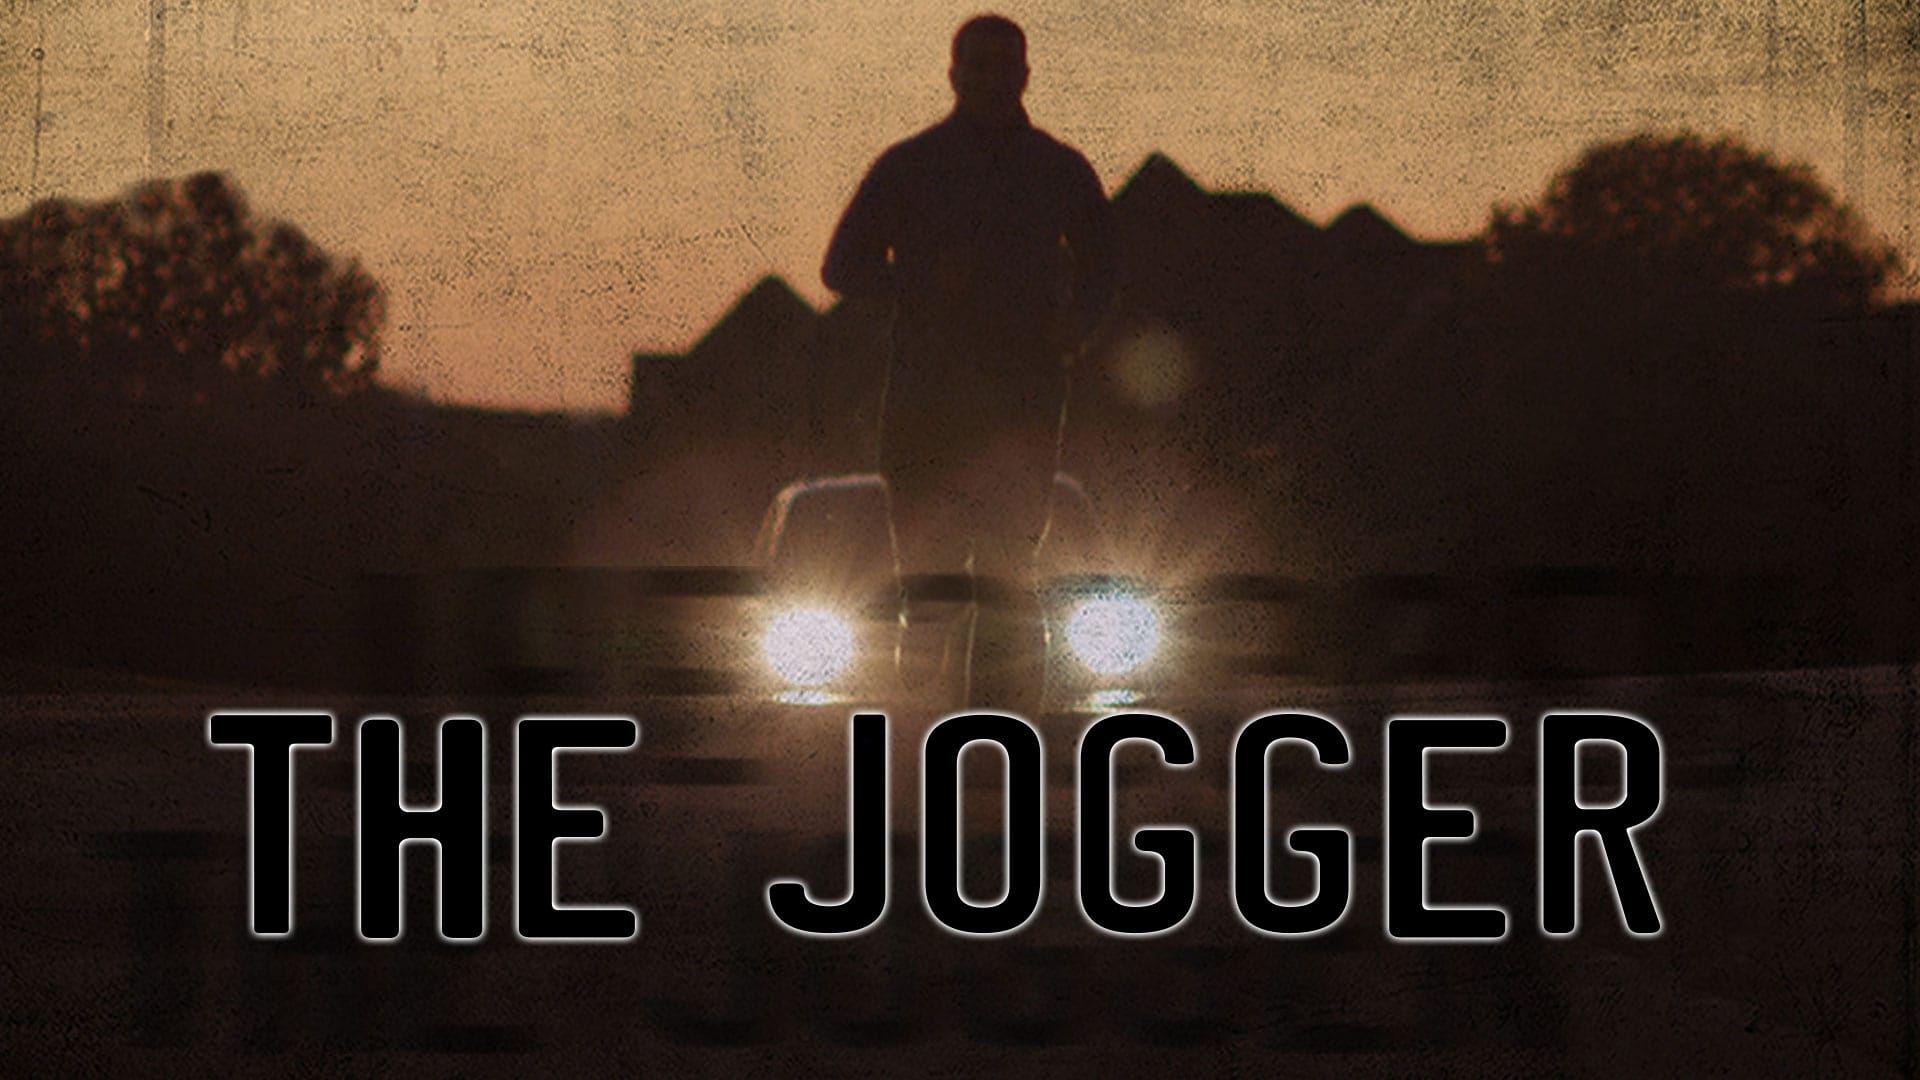 The Jogger background